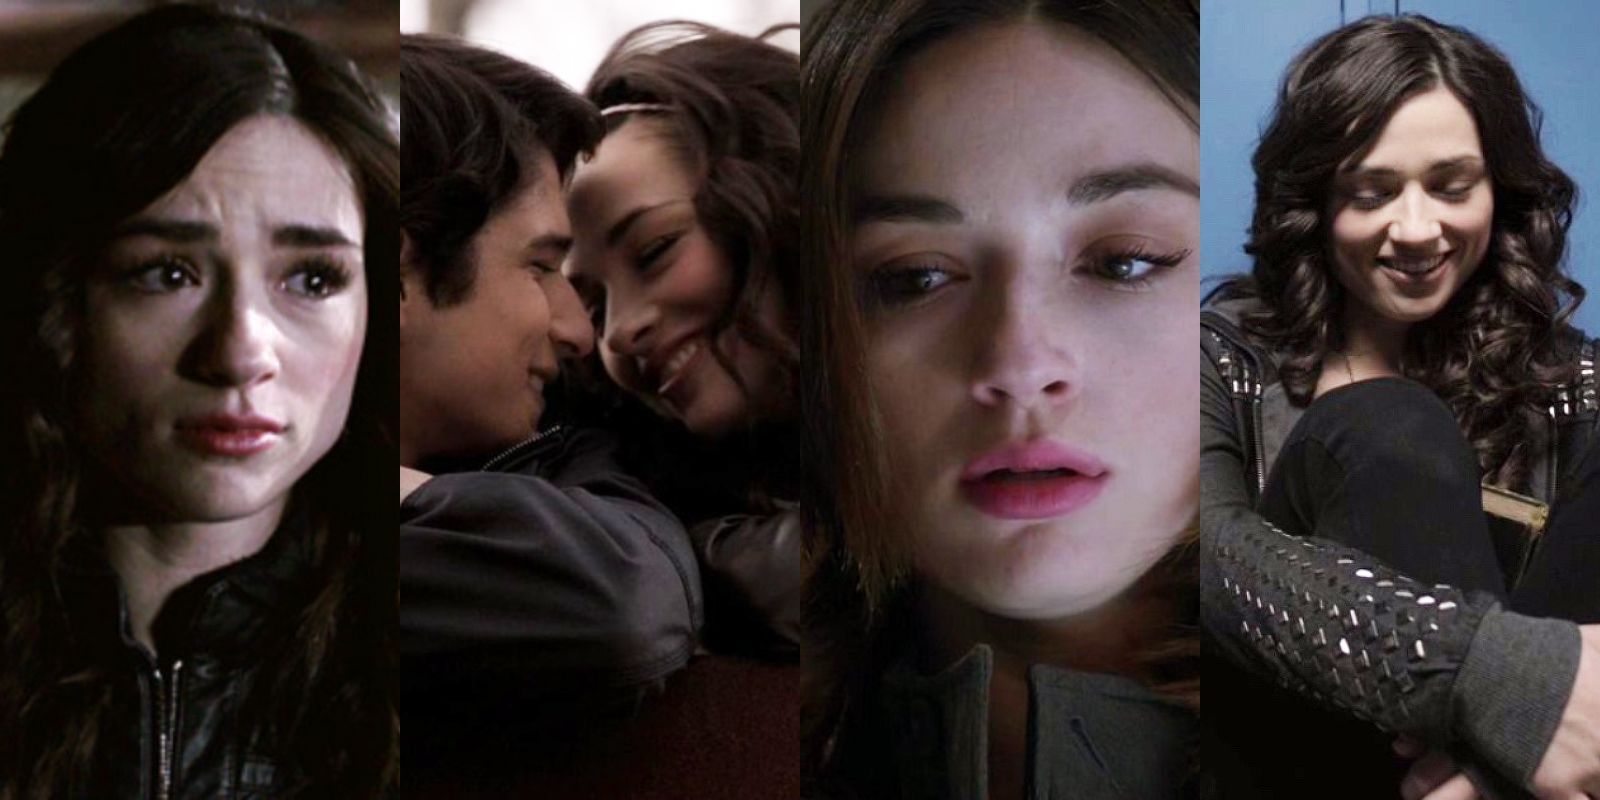 Teen Wolf: 10 Unpopular Opinions About Allison Argent (According To Reddit)